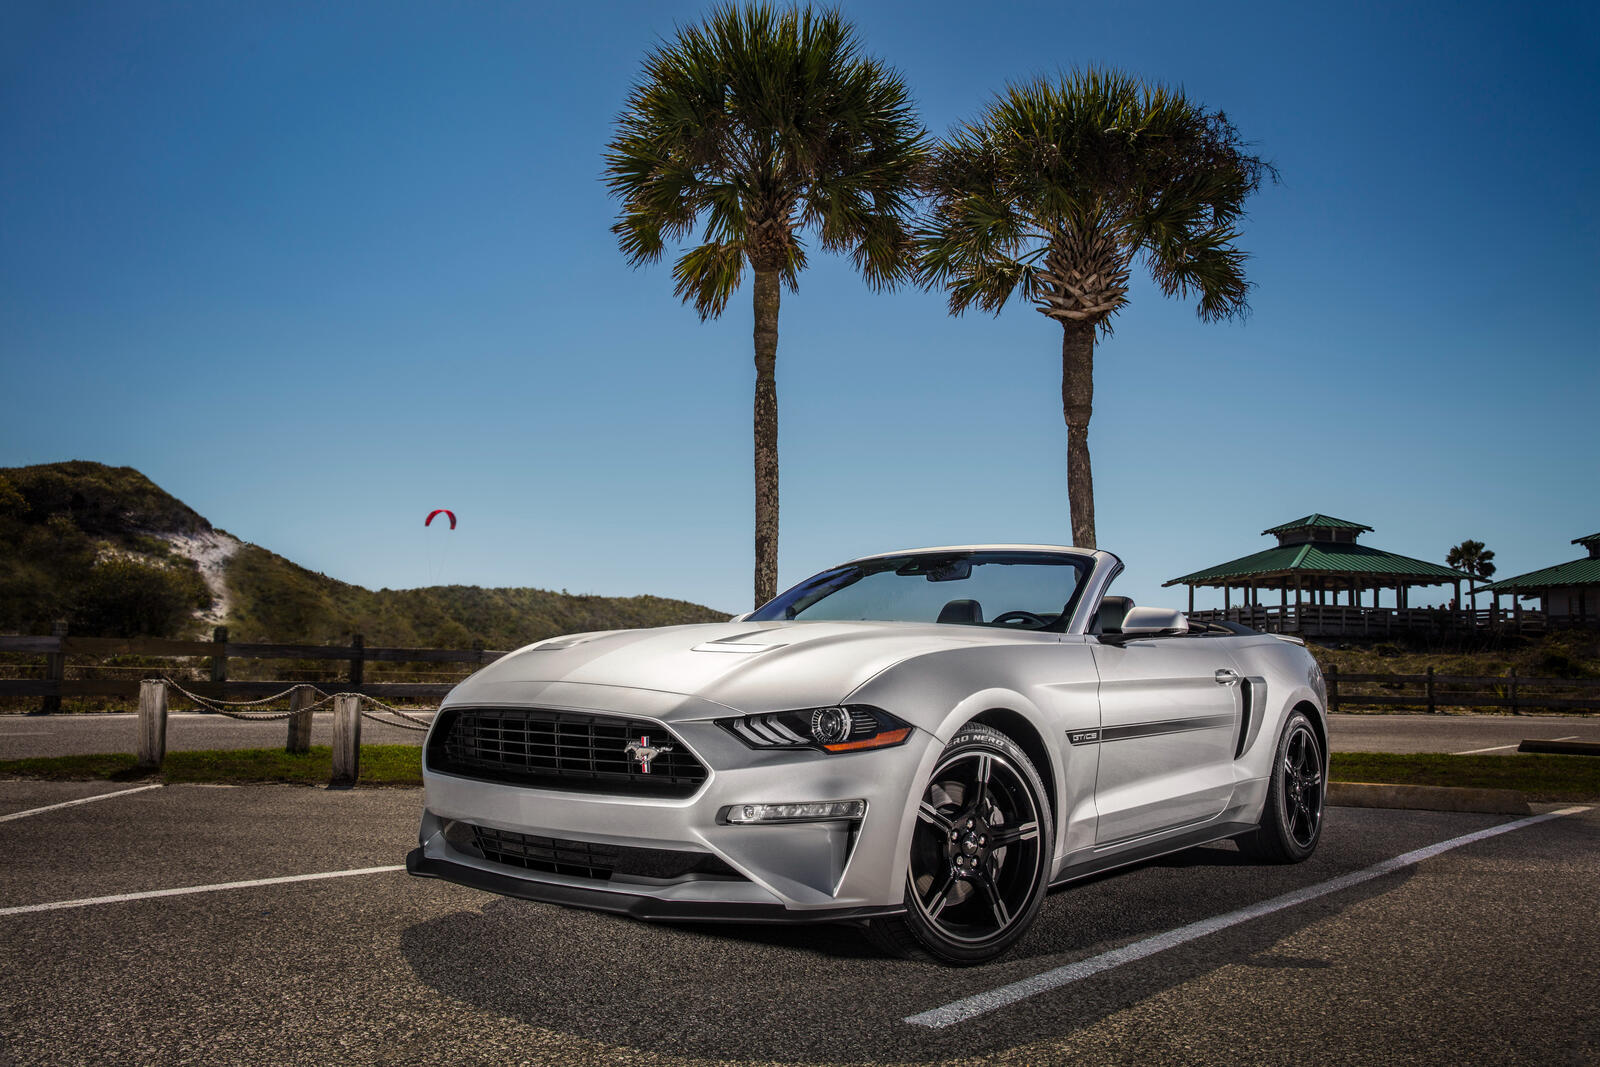 Wallpapers Mustang cars convertible on the desktop